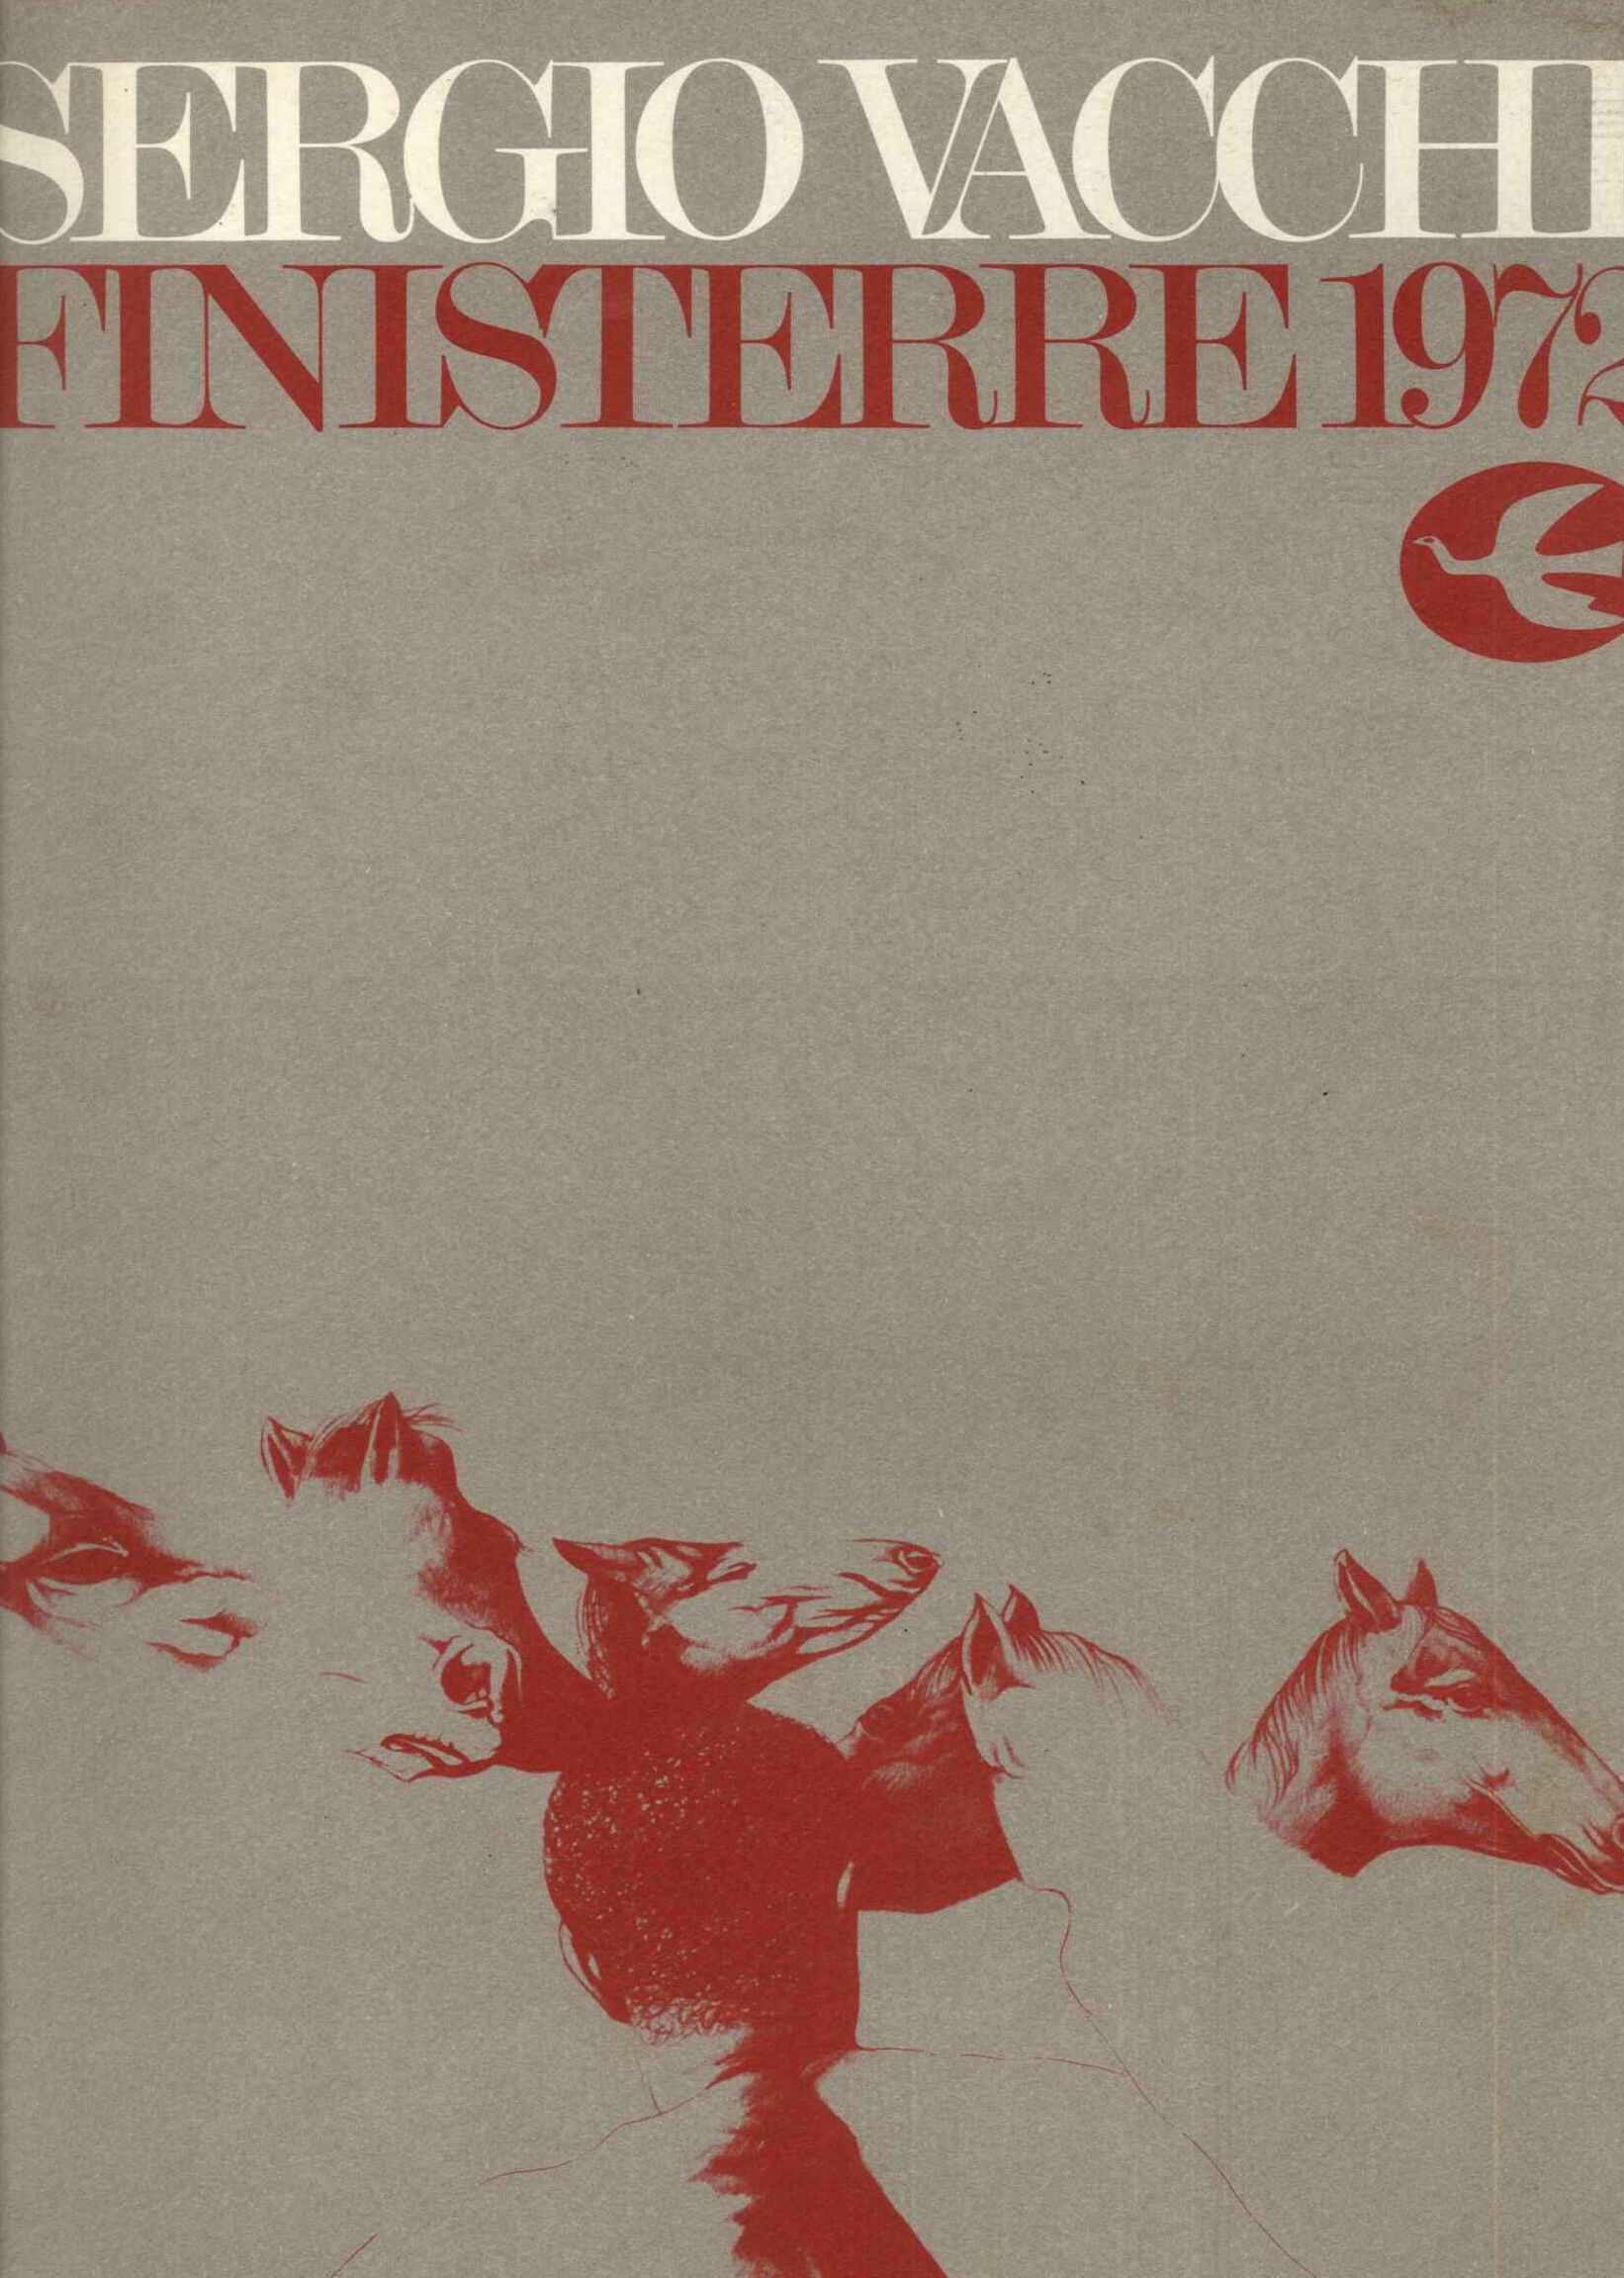 Finisterre 1972